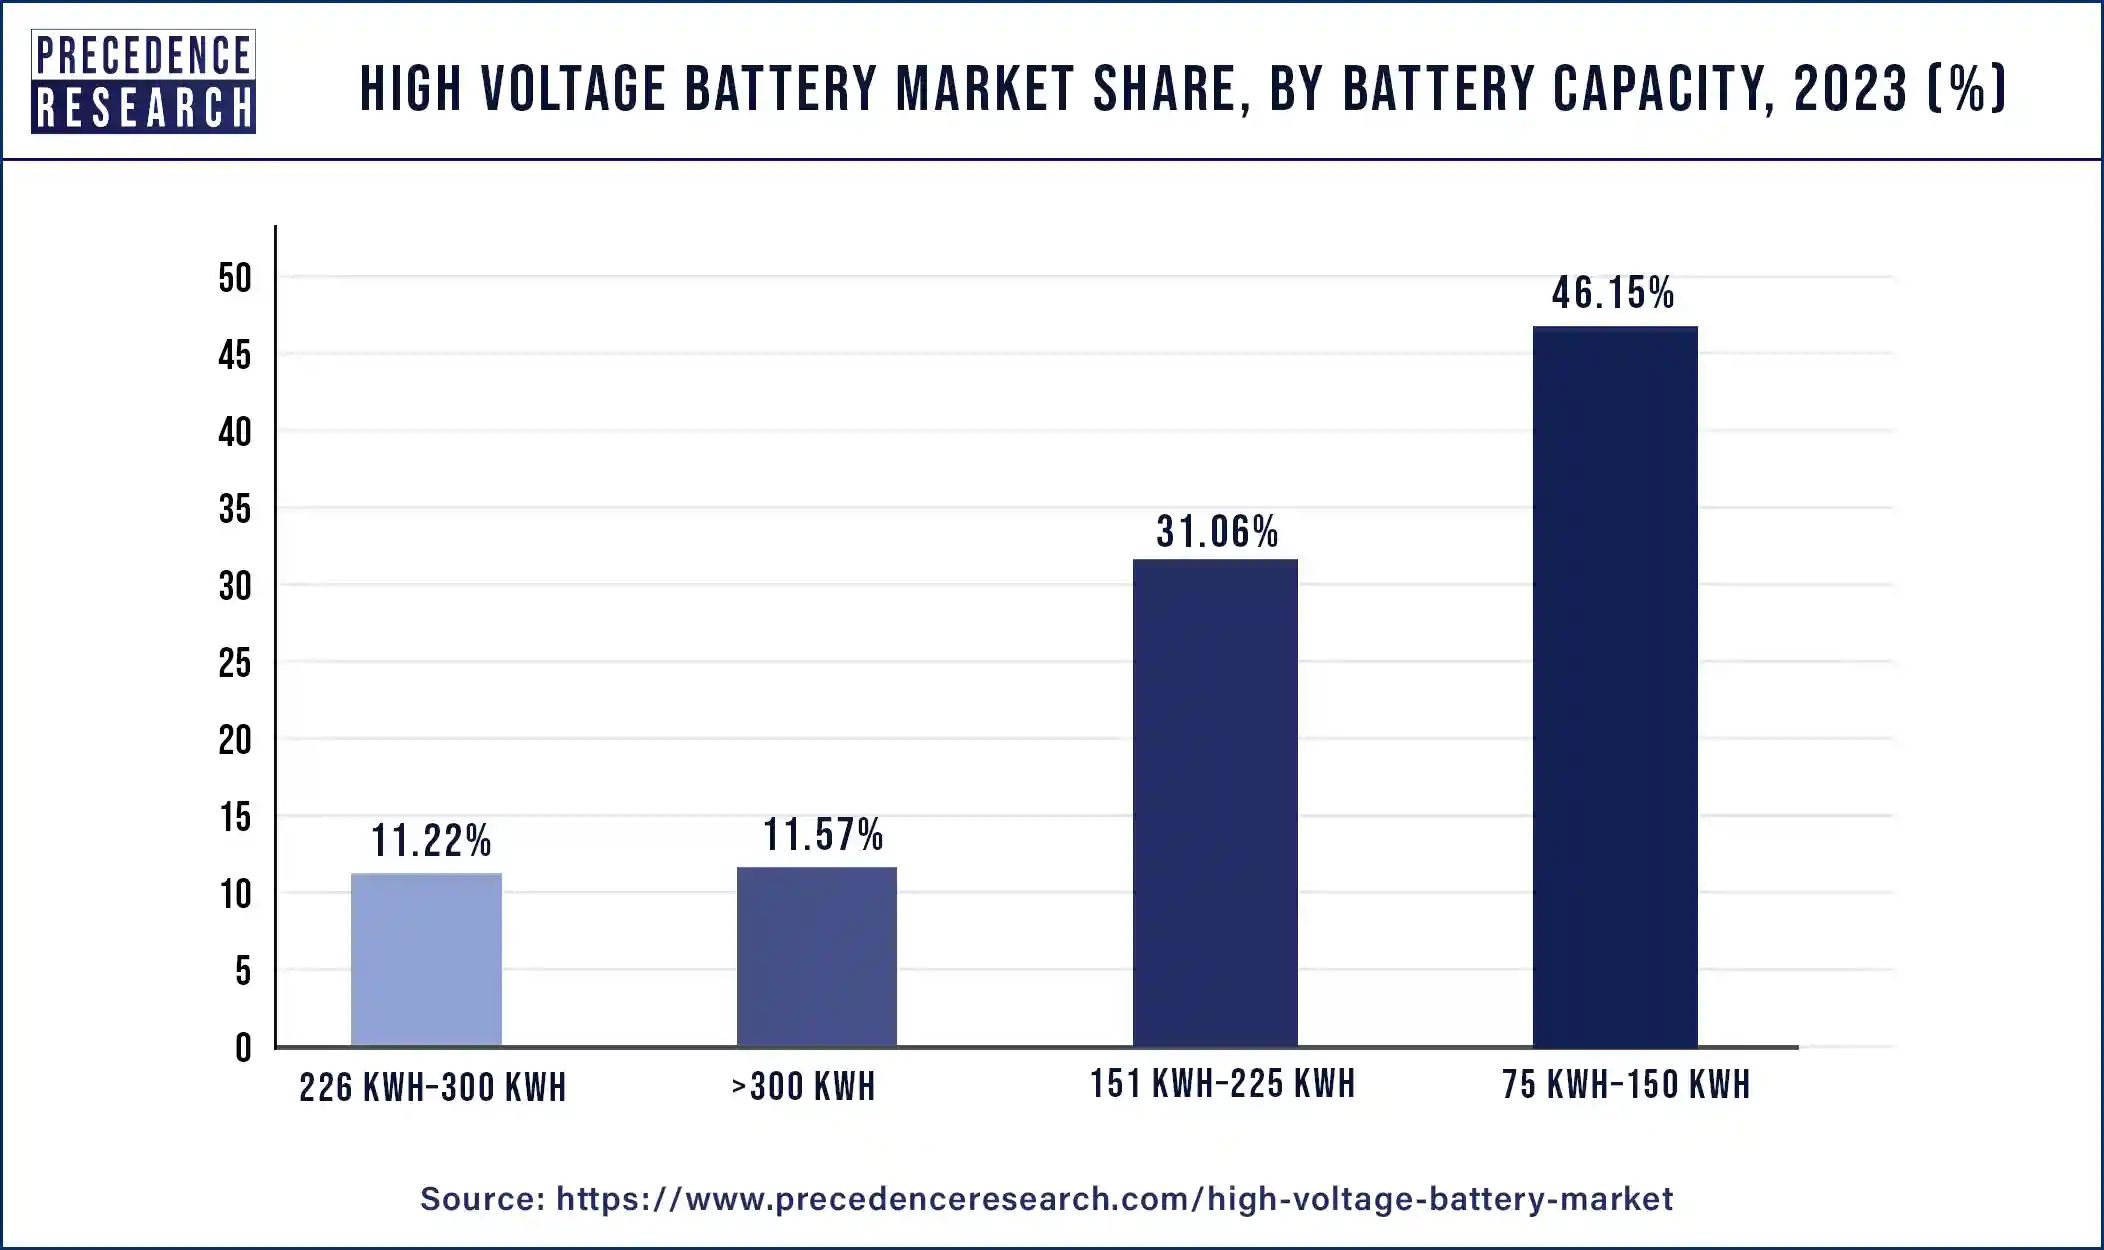 High Voltage Battery Market Share, By Battery Capacity, 2023 (%)